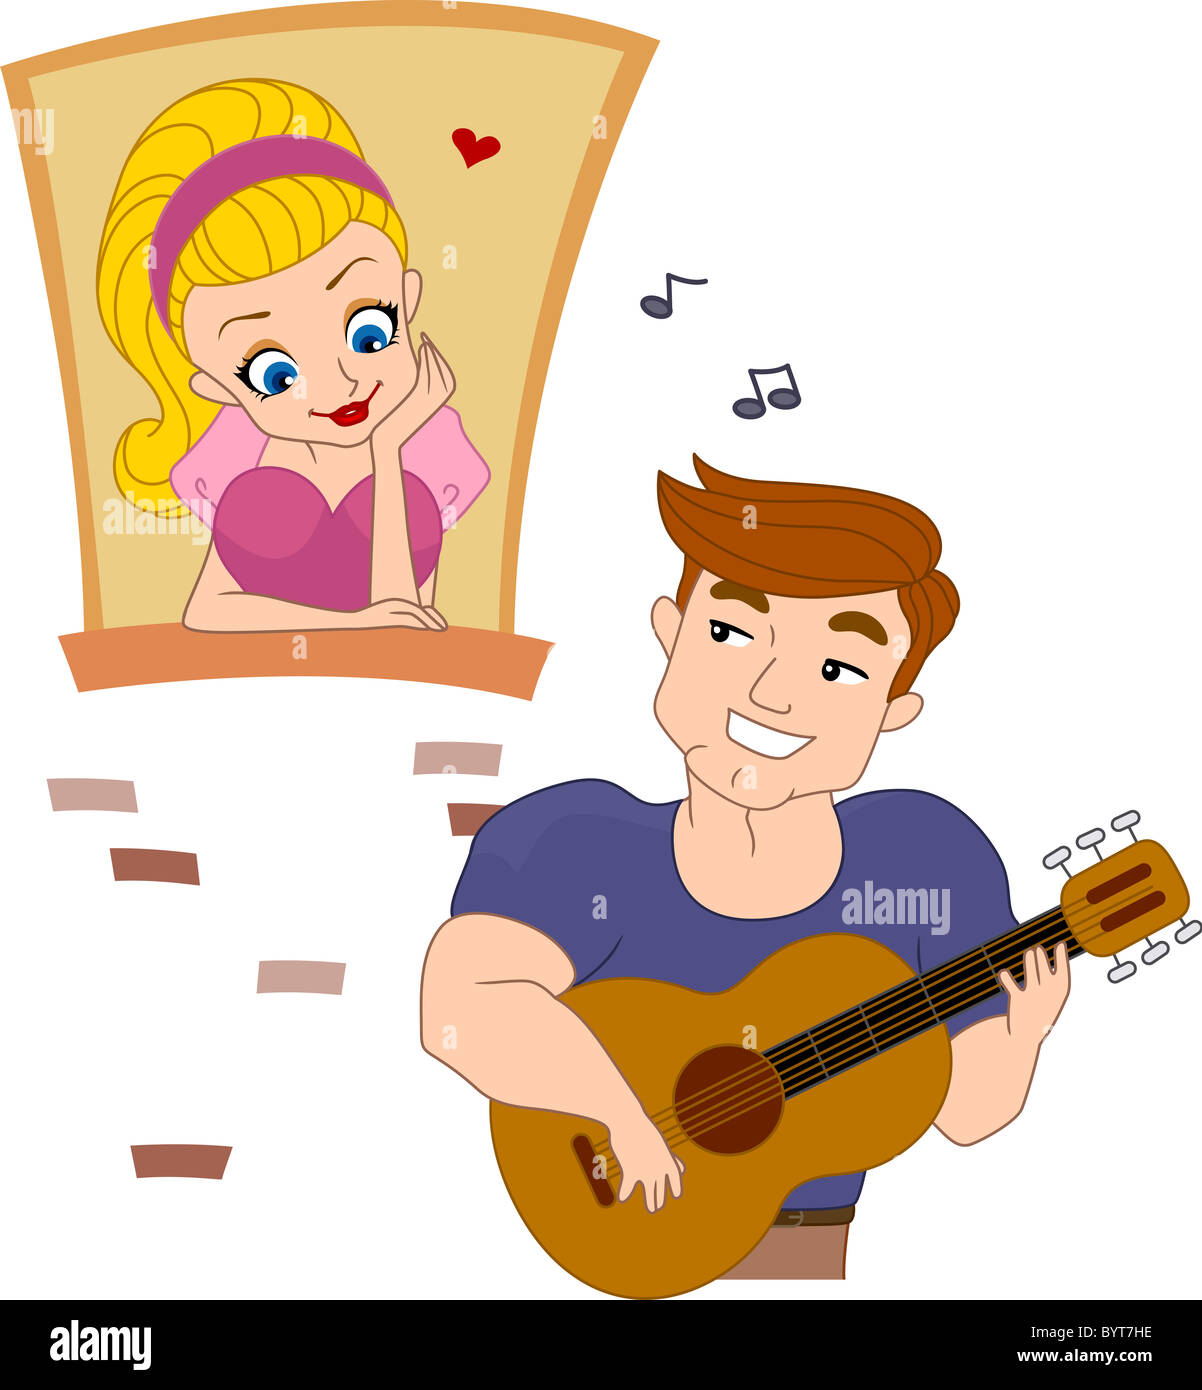 Illustration of a Pinup Guy Serenading a Girl Stock Photo